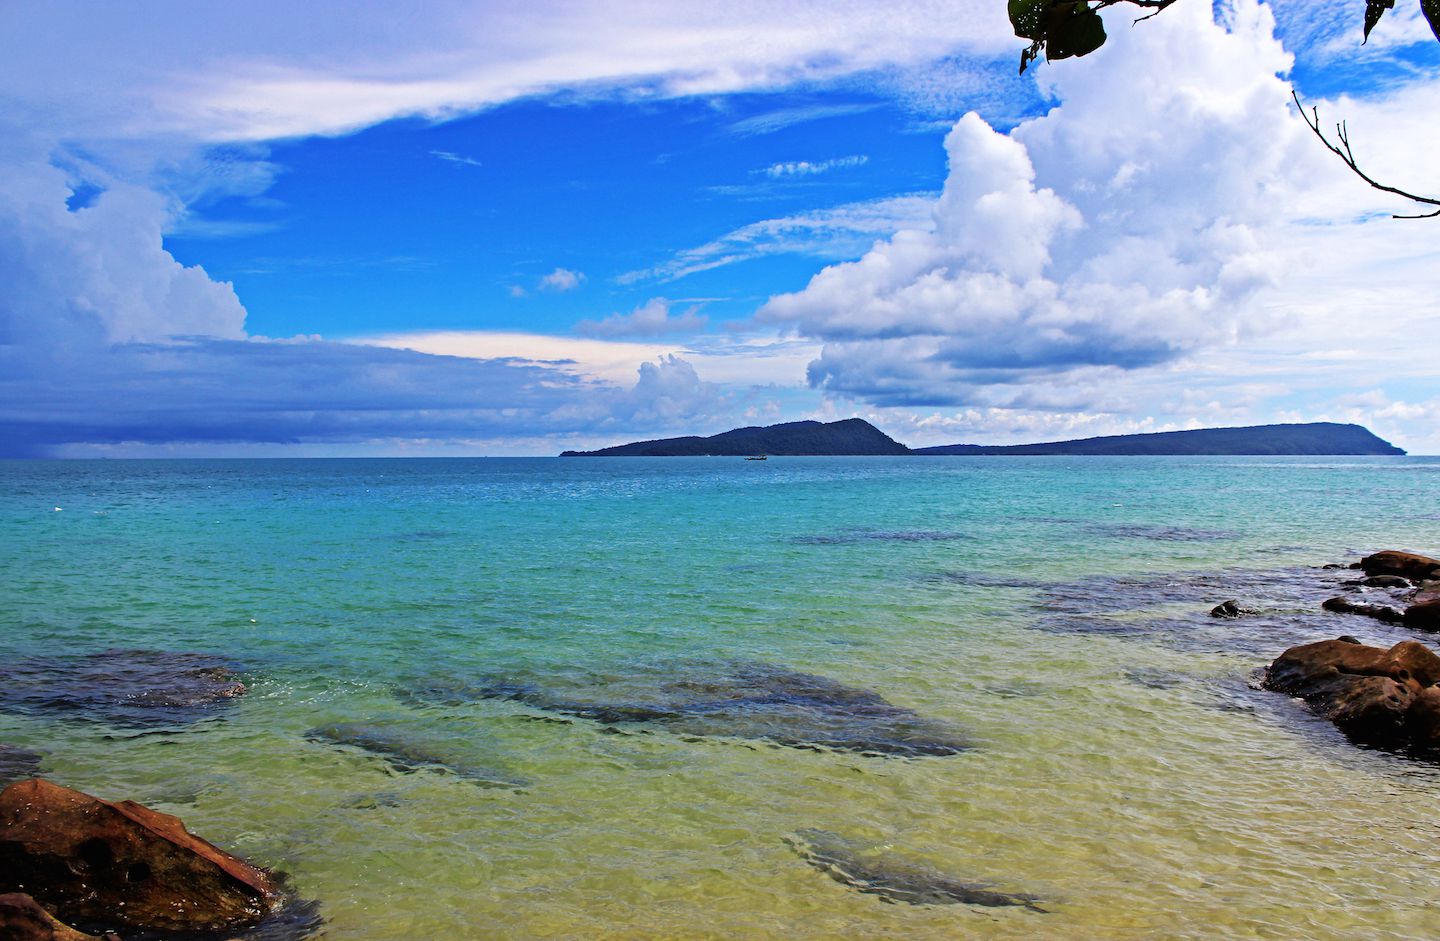 View of Koh Rong Samloem in the background